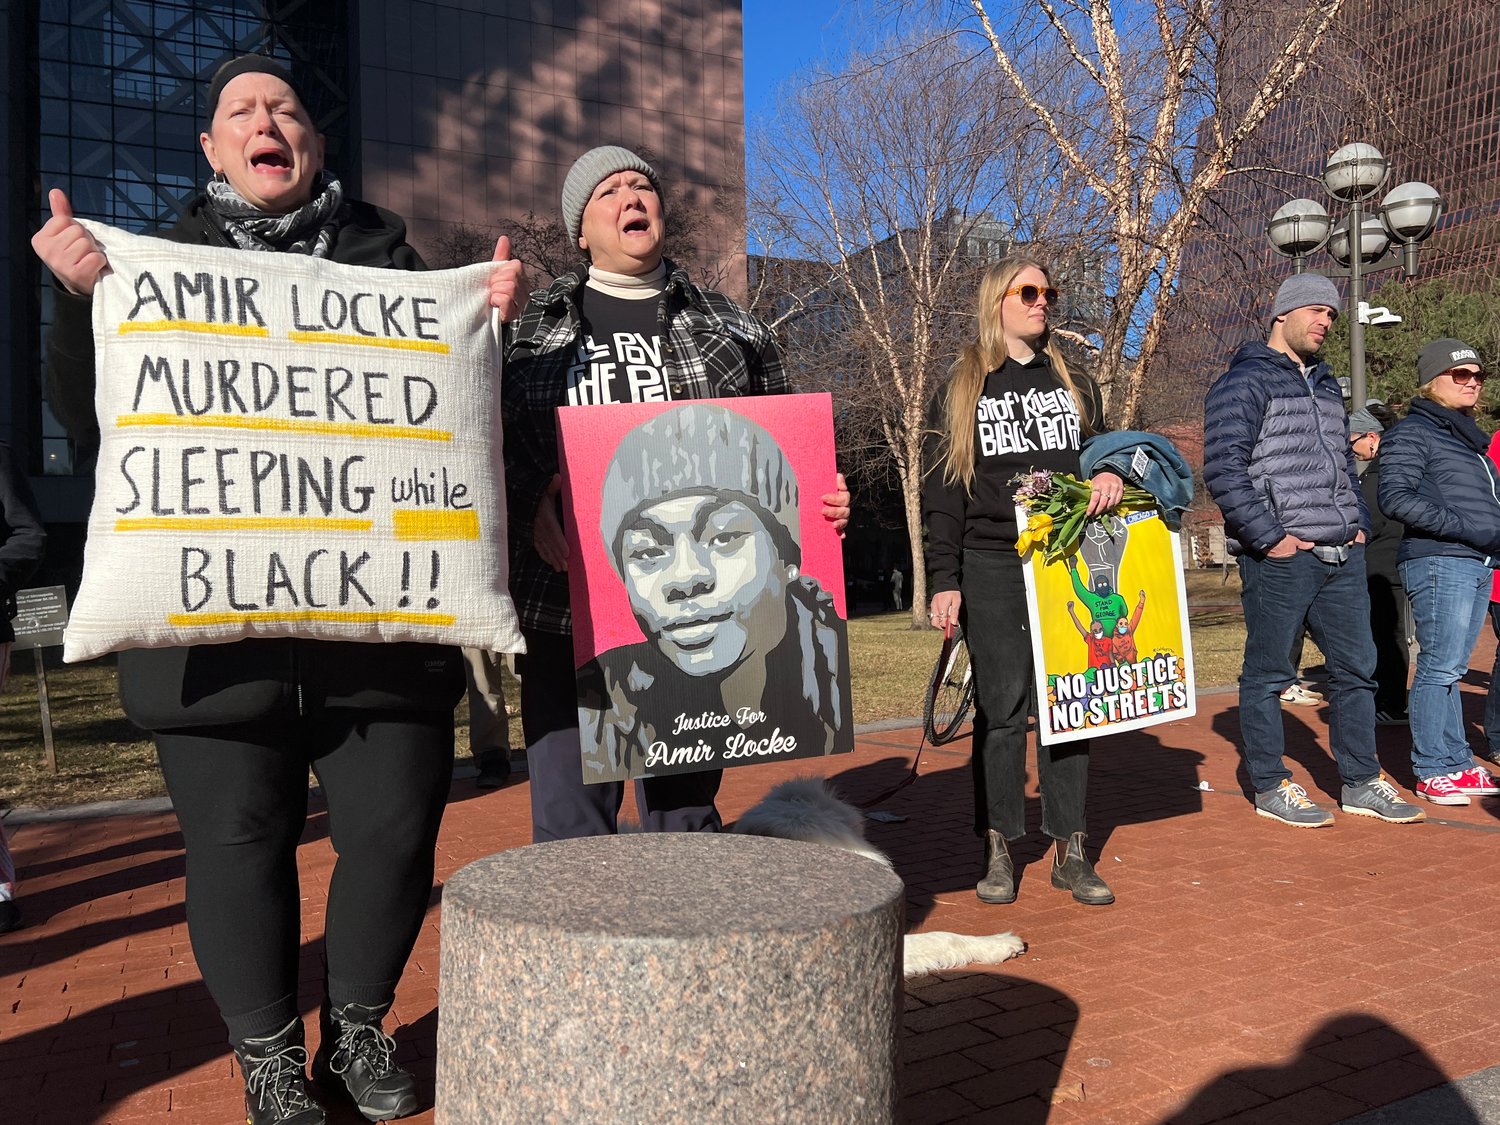 Community members hold rally and march in downtown Minneapolis on April 8 to protest the decision not to press charges against Officer Mark Hanneman in the fatal shooting of Amir Locke and to show support for Locke’s family and other families who have lost loved ones at the hands of police. (Photo by Jill Boogren)